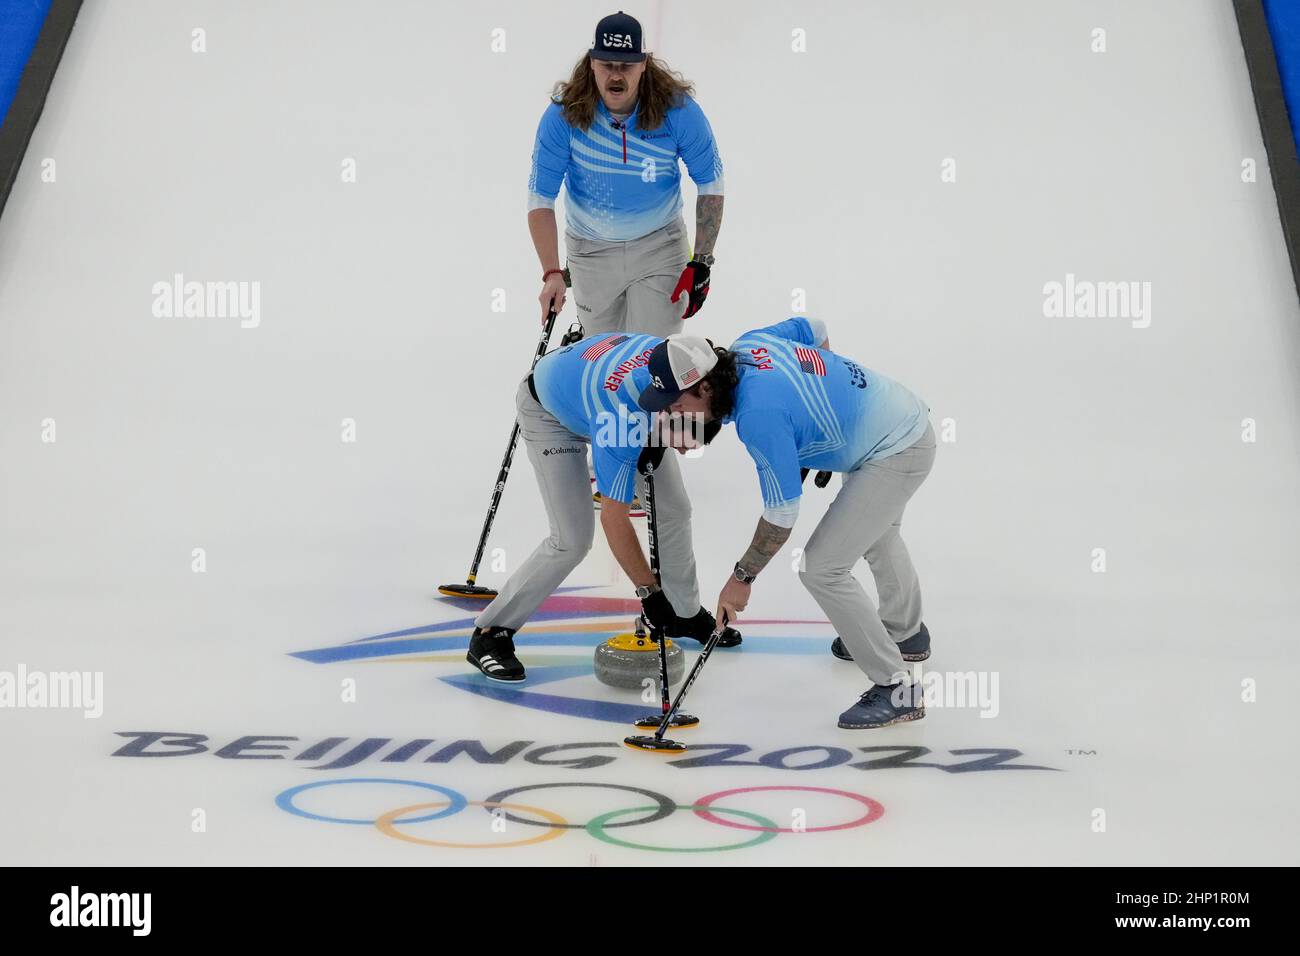 Beijing, China. 18th Feb, 2022. Team USA skip Matt Hamilton shouts to sweeps John Landsteiner (L) and Christopher Plys during their Men's Curling Bronze Medal Game against Team Canada at the Beijing 2022 Winter Olympics on Friday, February 18, 2022. Photo by Paul Hanna/UPI Credit: UPI/Alamy Live News Stock Photo